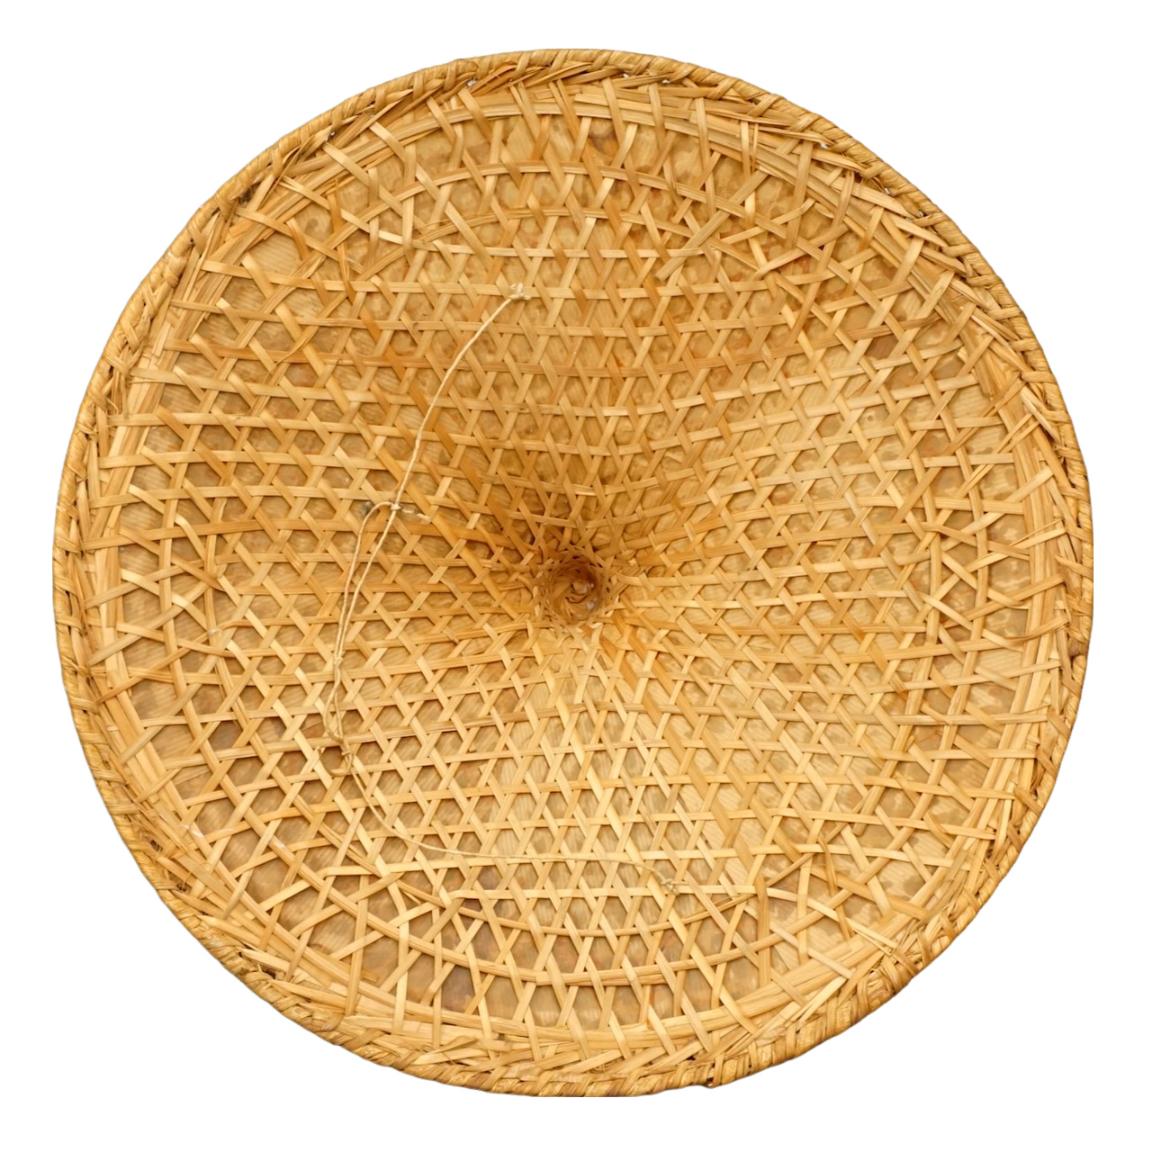 Women's or Men's Asian Wicker Conical Coolie Hat circa 1940s For Sale